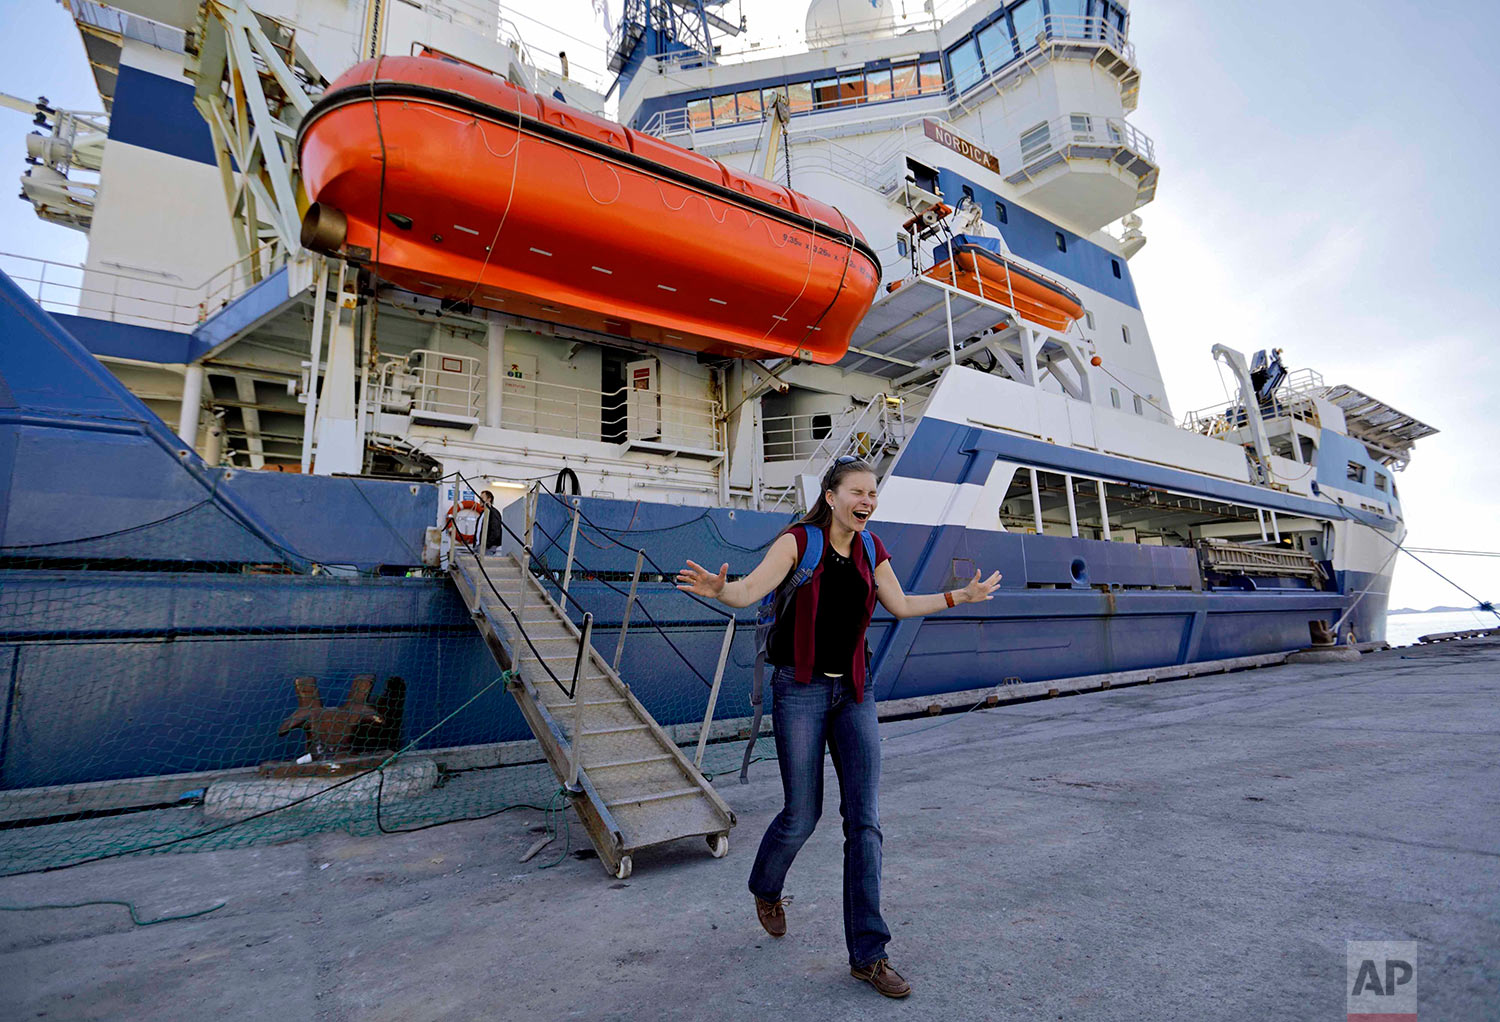  Researcher Daria Gritsenko steps onto land for the first time since setting sail aboard the Finnish icebreaker MSV Nordica as it arrives into Nuuk, Greenland, after traversing the Northwest Passage through the Canadian Arctic Archipelago, Saturday, 